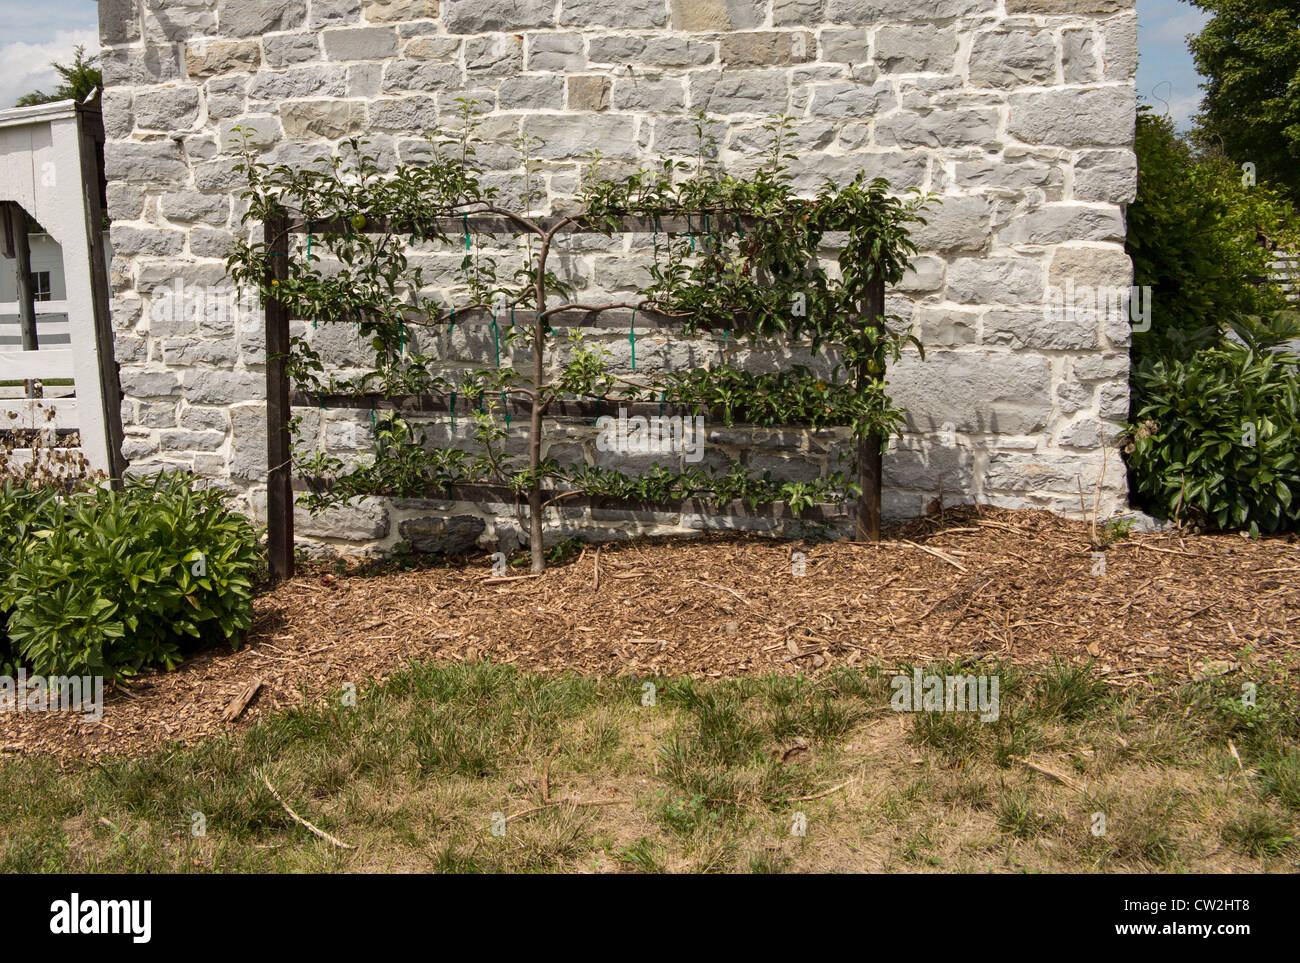 Apple tree trained in espalier against wall of stone building Stock Photo